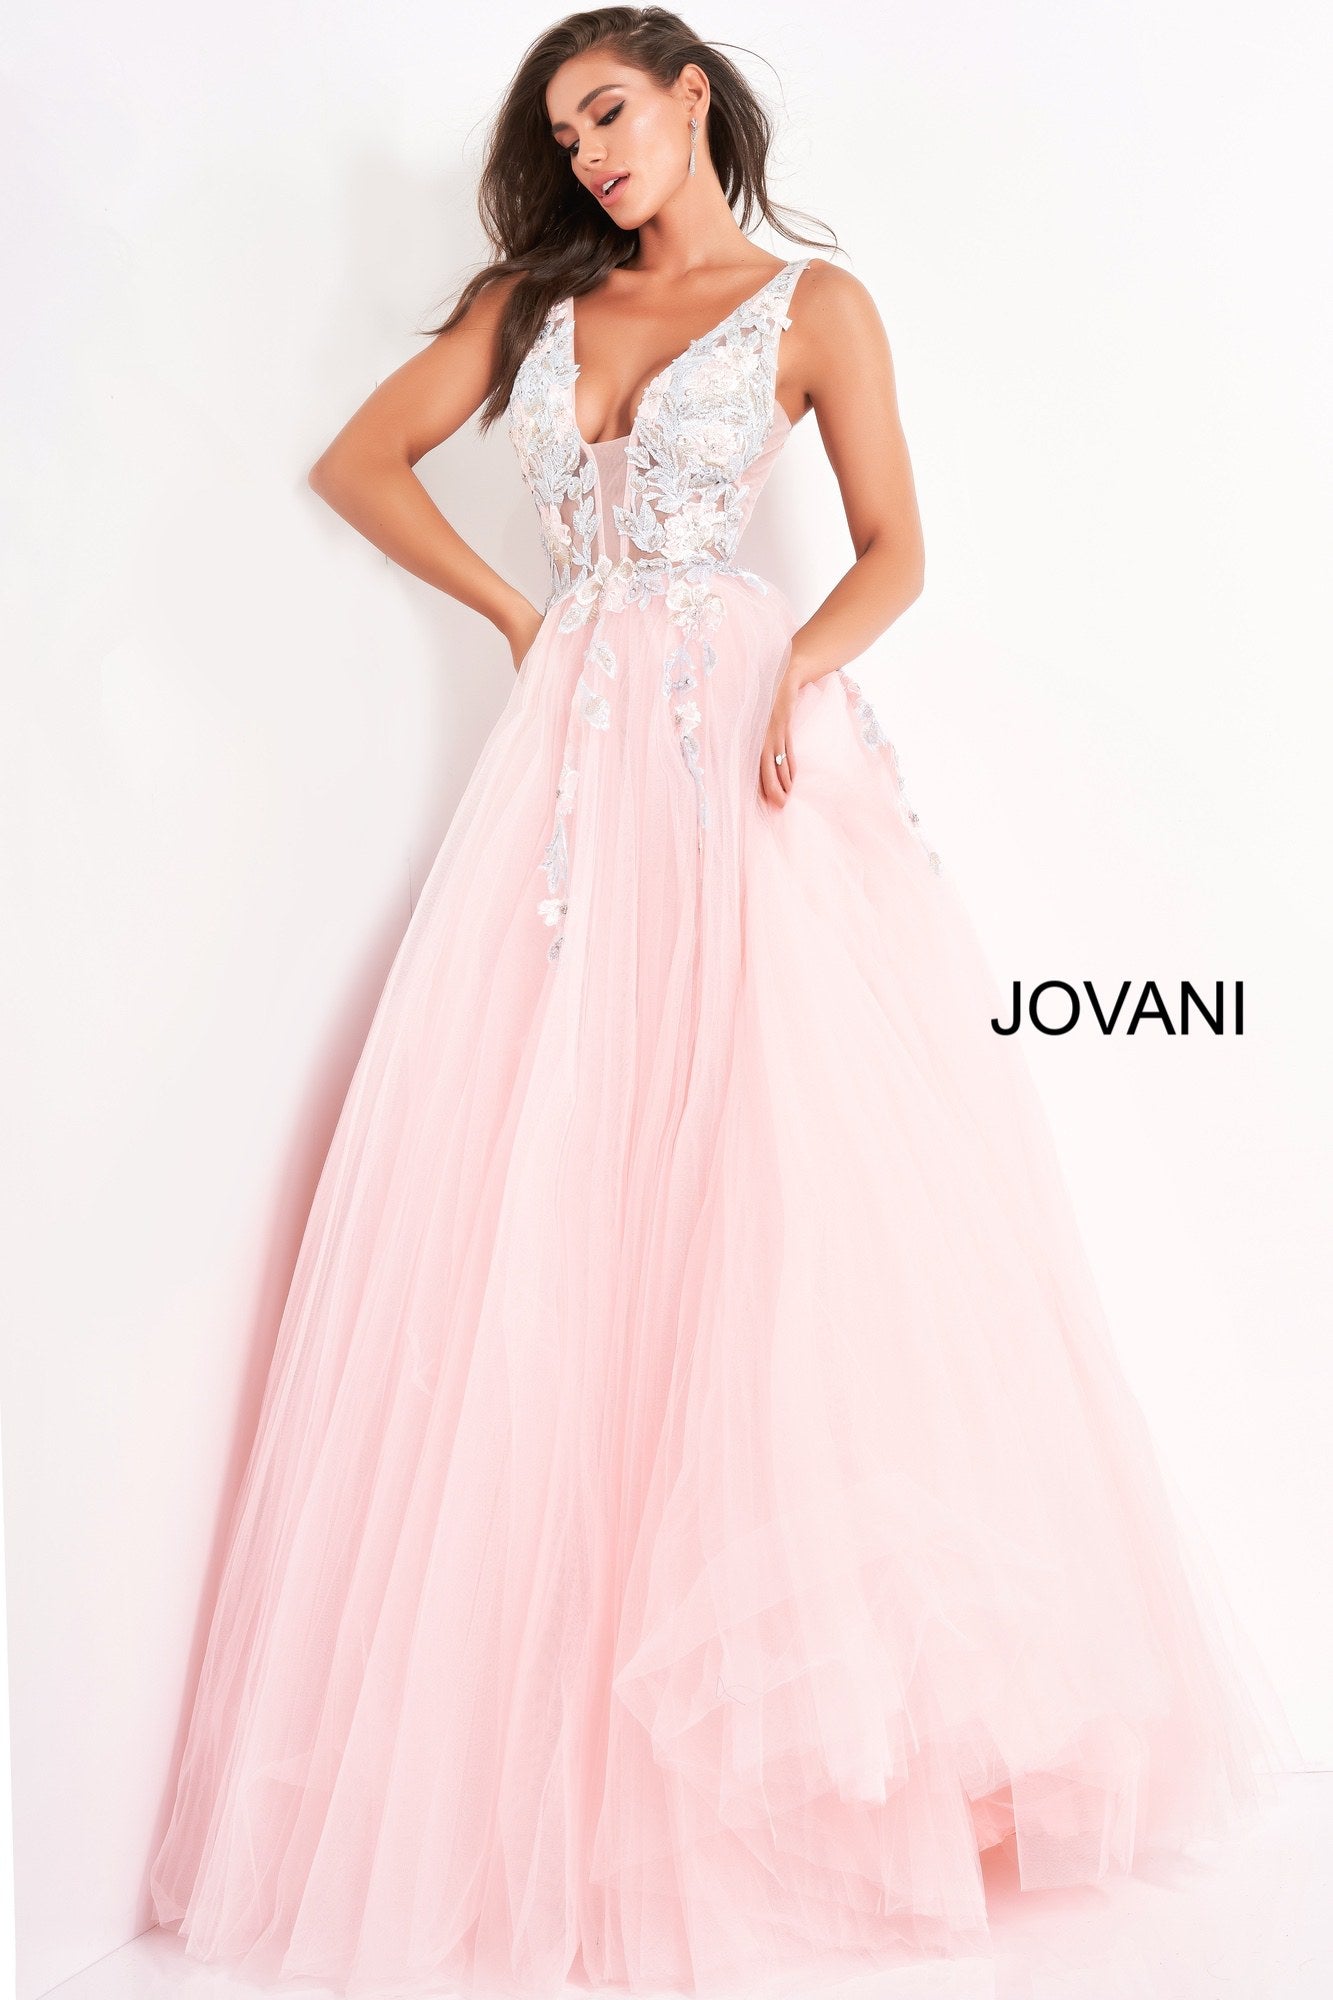 Jovani 11092 floral embellished plunging neckline tulle prom dress ball gown evening dress. Long Sheer floral lace applique embellished formal ball gown evening. Prom Dress, Pageant Gown.  Light blue tulle prom ballgown with floral embroidered bodice featuring a sheer sleeveless bodice, plunging neckline and low v-shaped back with zipper, floor-length A-line skirt. Available colors:  Blush, Light Blue